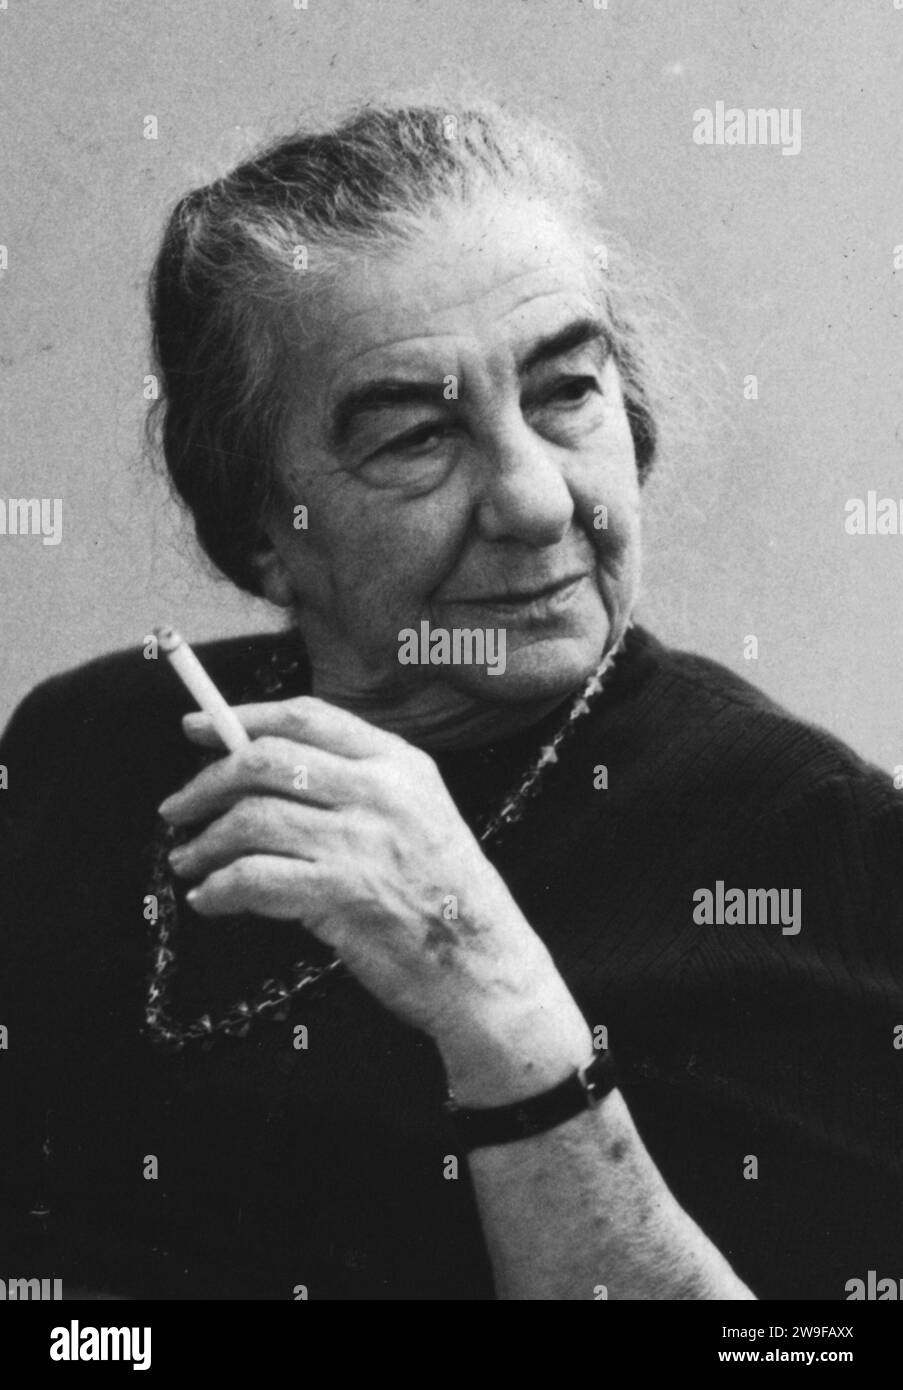 Golda Meir, Golda Meir (Mabovitch; 1898 – 1978) Israeli politician who served as the fourth prime minister of Israel from 1969 to 1974. Stock Photo